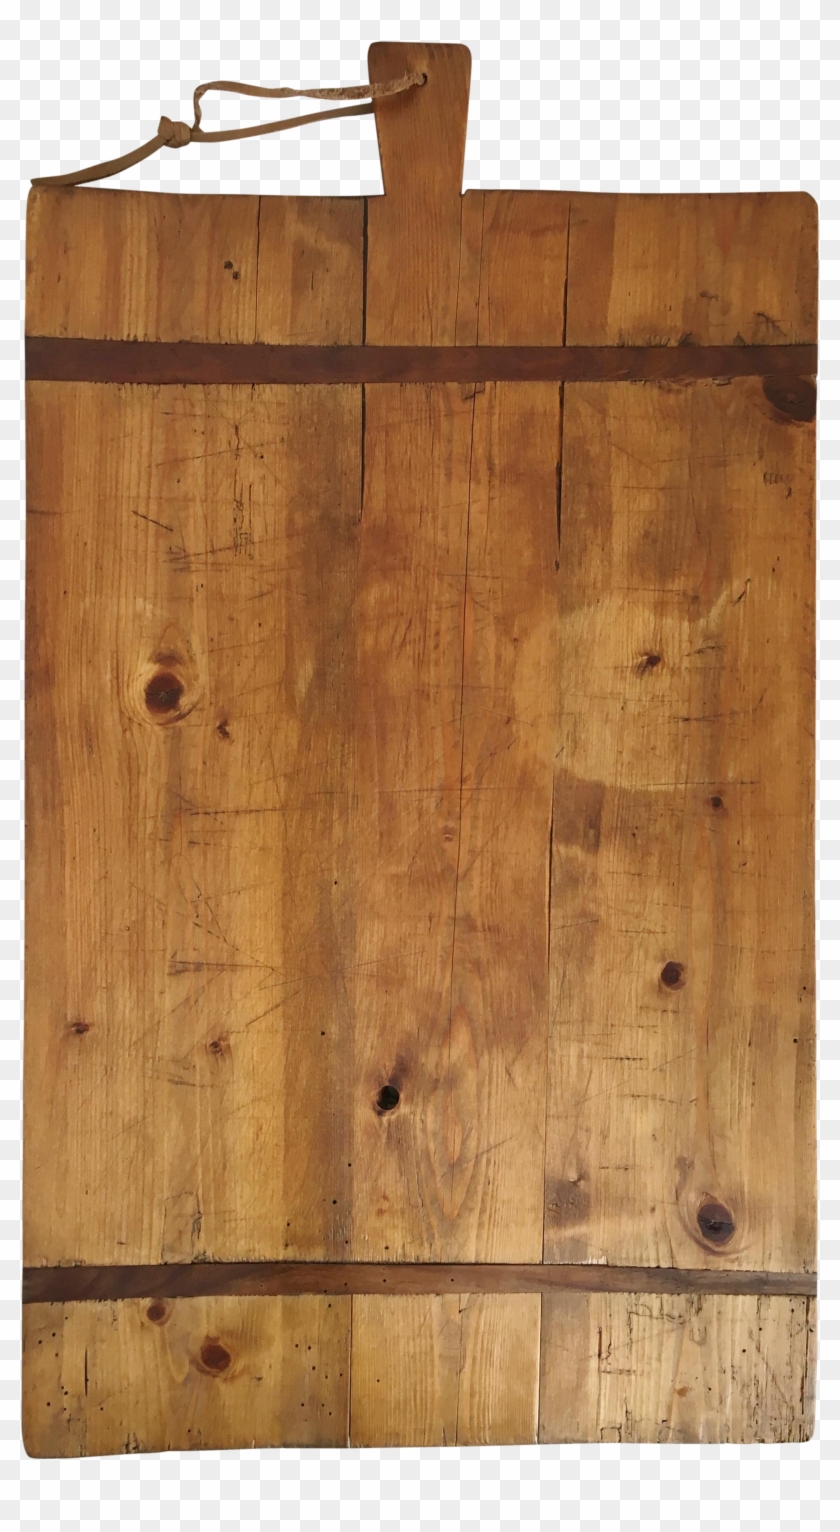 Antique French Pine Wood Chairish - Plank Clipart #2153883